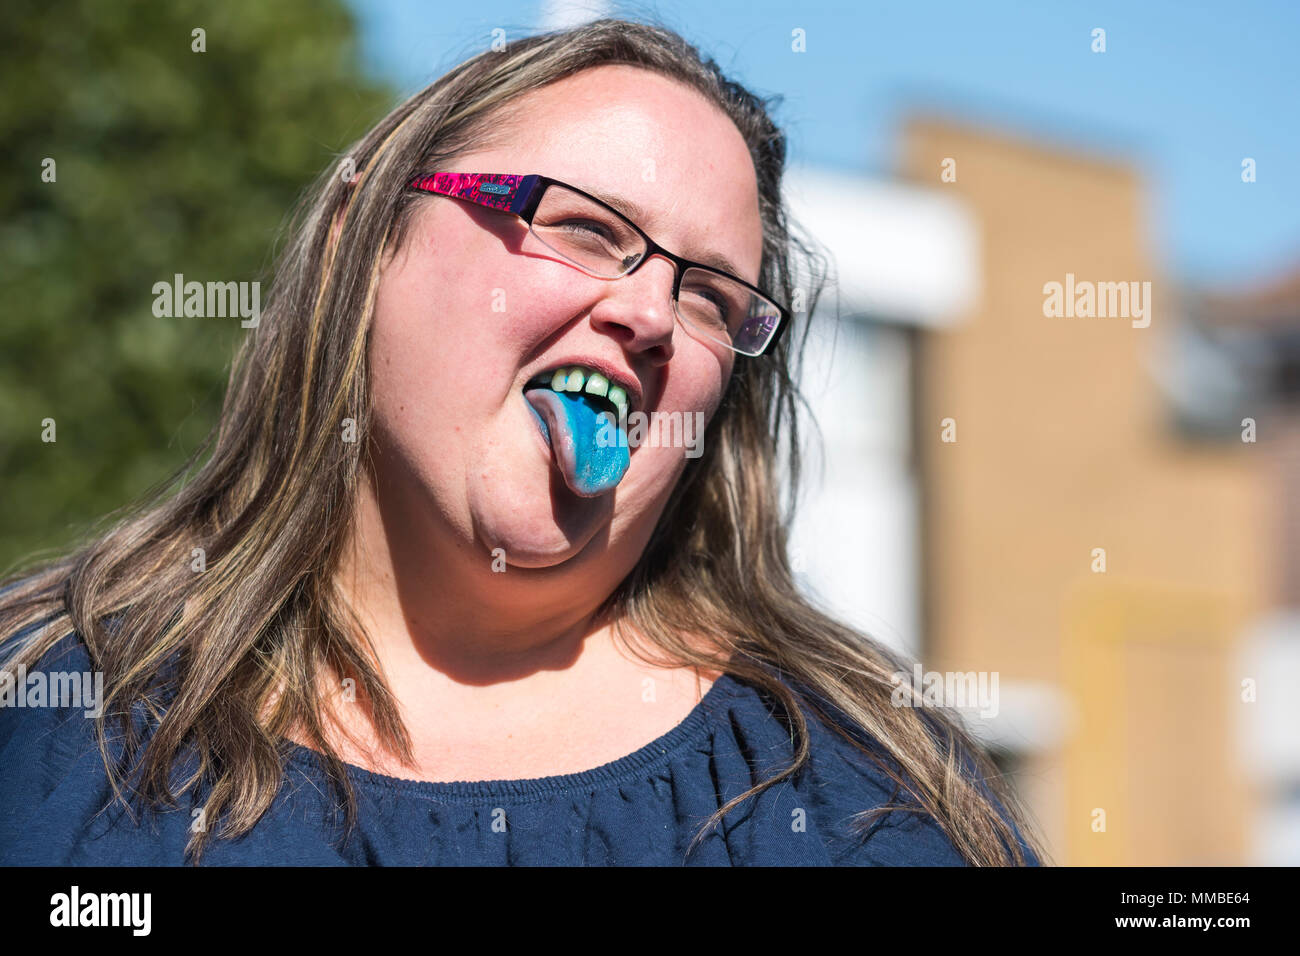 Woman sticking tongue out after drinking blue slush puppy drink, showing blue stains on her tongue and teeth, while smiling in Summer. Happy concept. Stock Photo